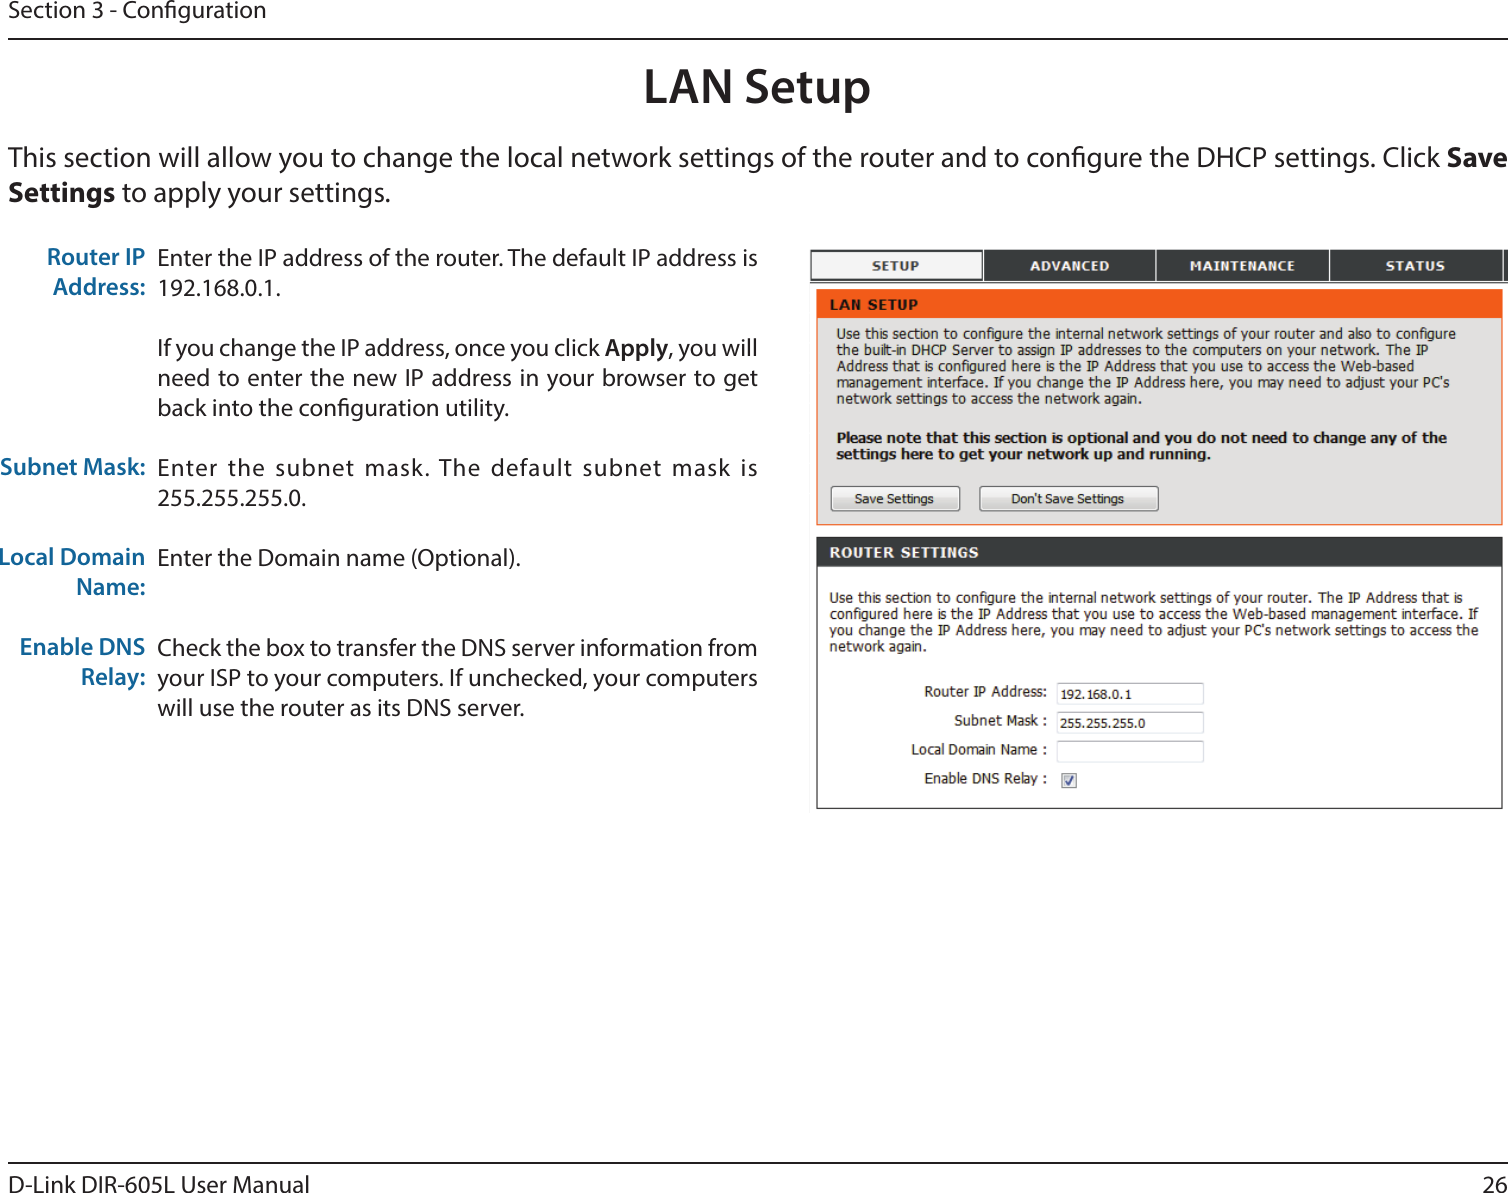 26D-Link DIR-605L User ManualSection 3 - CongurationThis section will allow you to change the local network settings of the router and to congure the DHCP settings. Click Save Settings to apply your settings.LAN SetupEnter the IP address of the router. The default IP address is 192.168.0.1.If you change the IP address, once you click Apply, you will need to enter the new IP address in your browser to get back into the conguration utility.Enter the subnet mask. The default subnet mask is 255.255.255.0.Enter the Domain name (Optional).Check the box to transfer the DNS server information from your ISP to your computers. If unchecked, your computers will use the router as its DNS server.Router IP Address:Subnet Mask:Local Domain Name:Enable DNS Relay: